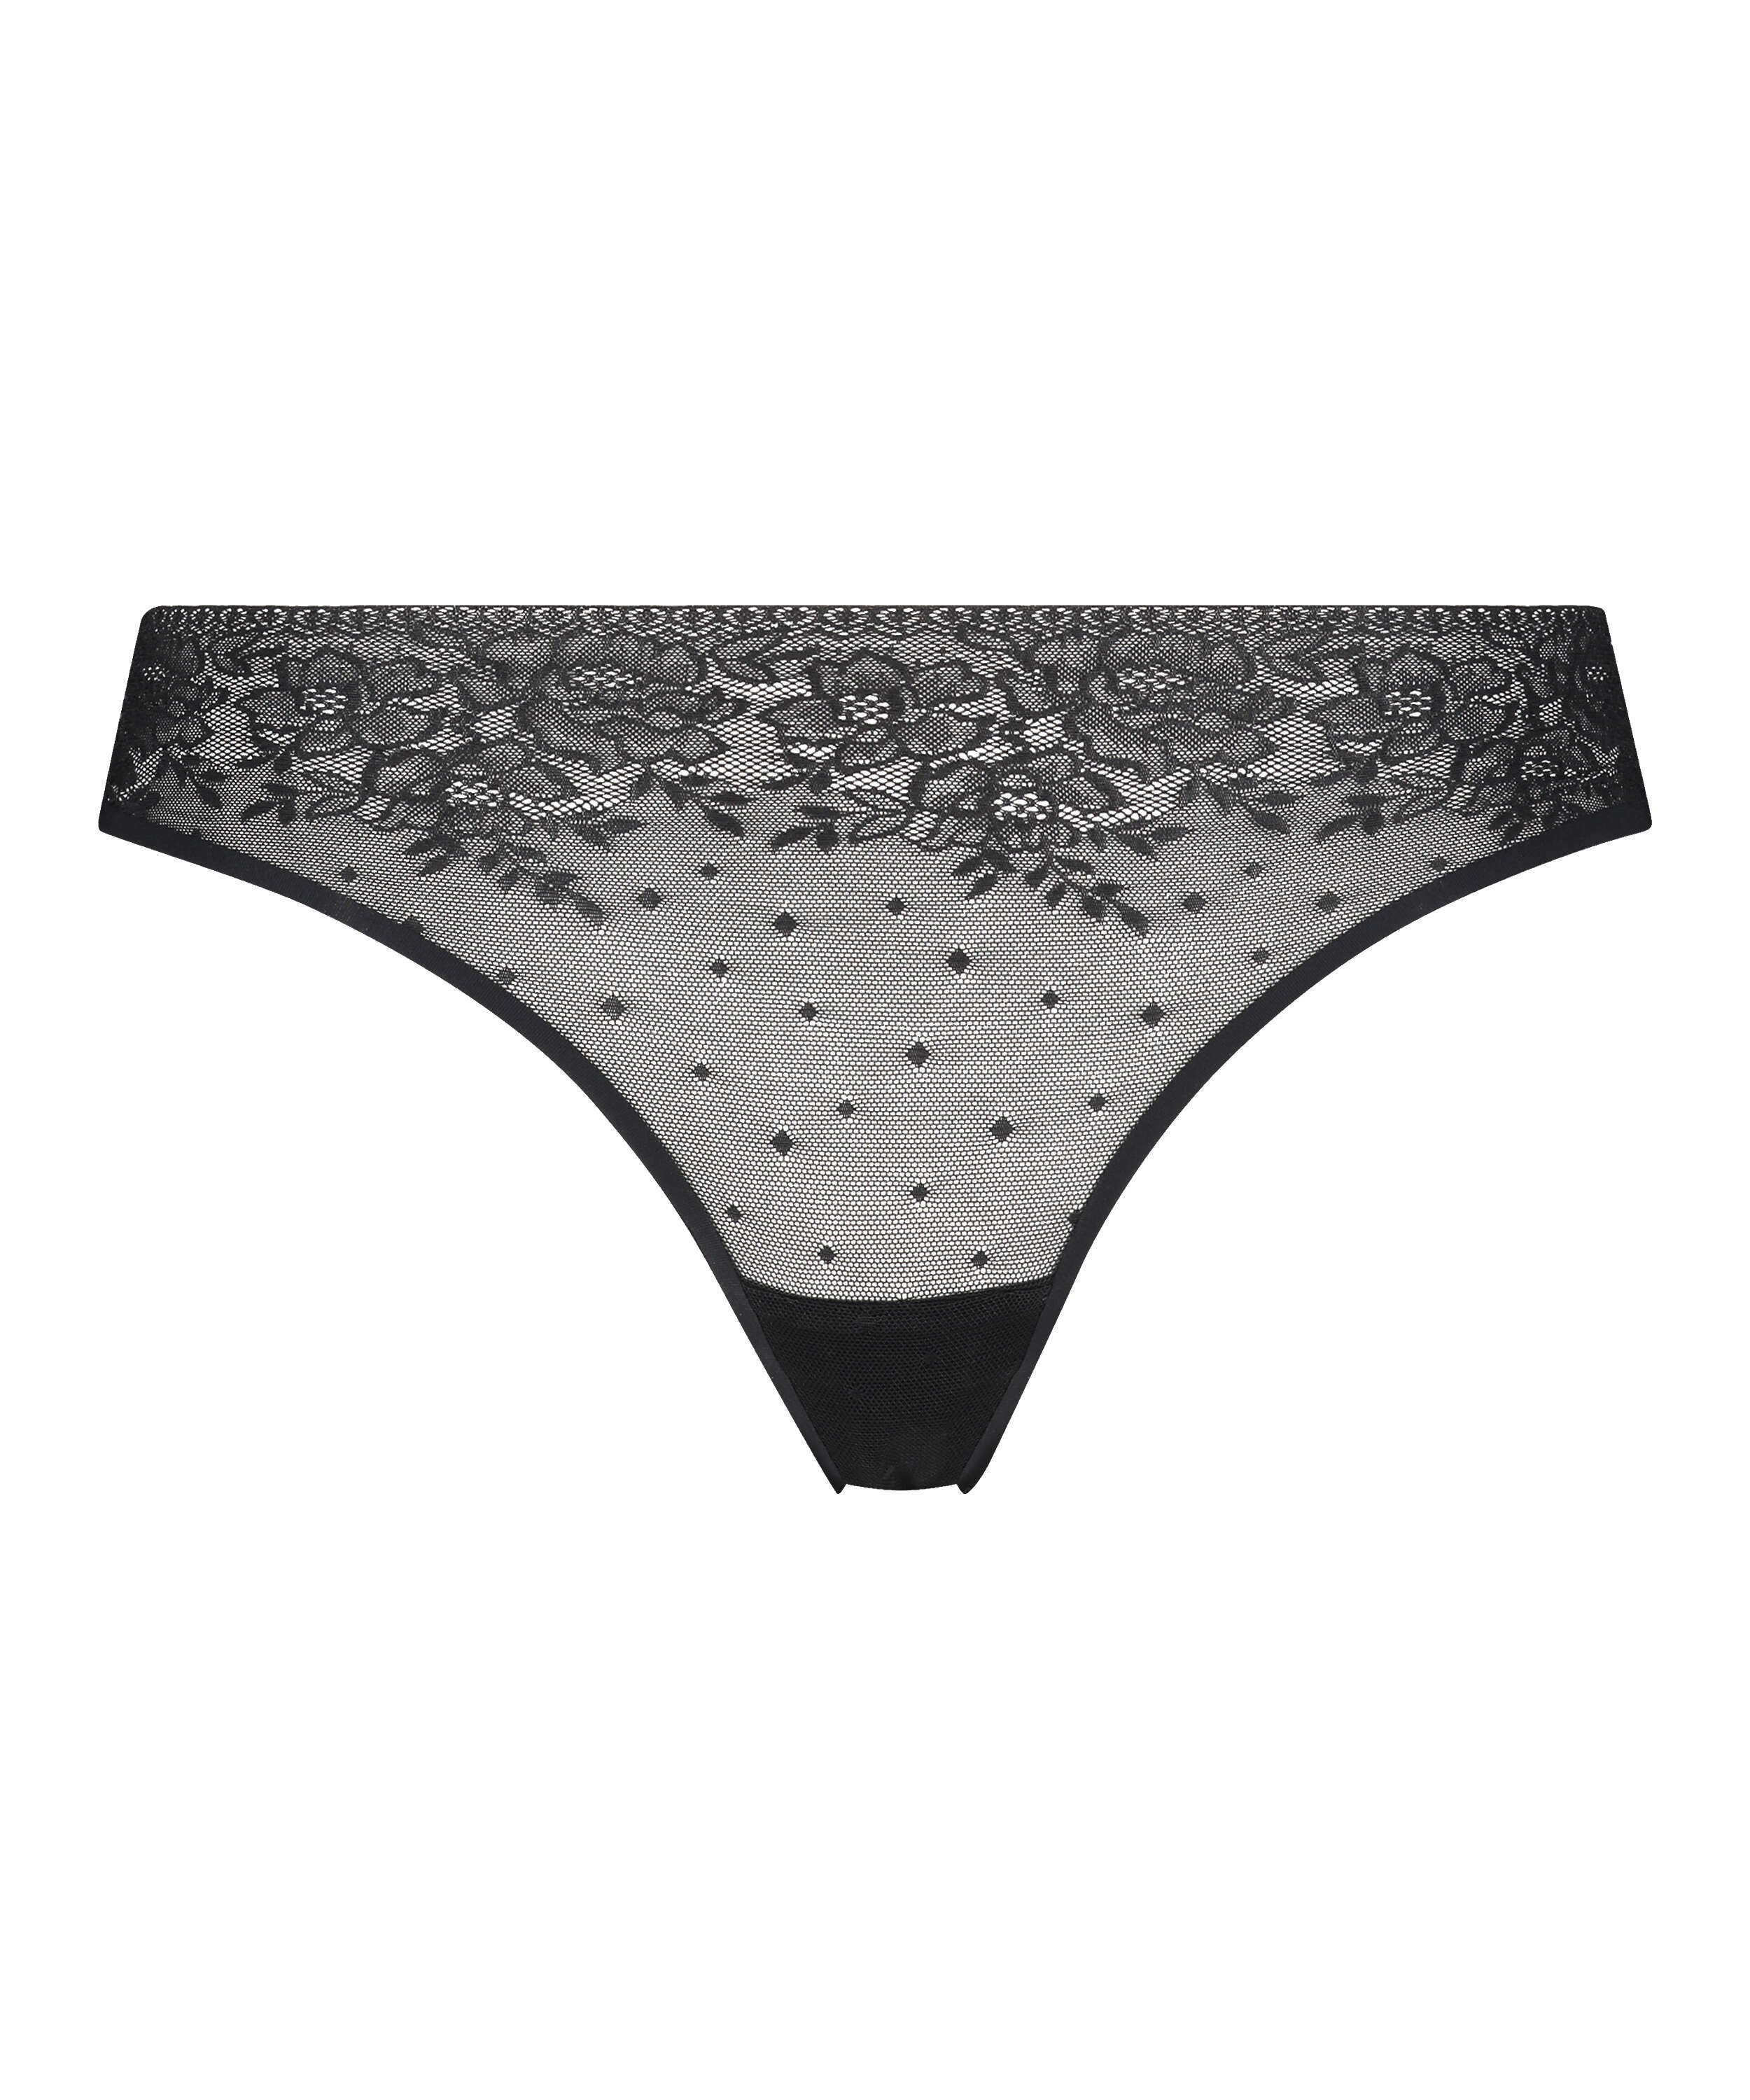 Allover Lace Invisible thong, Black, main